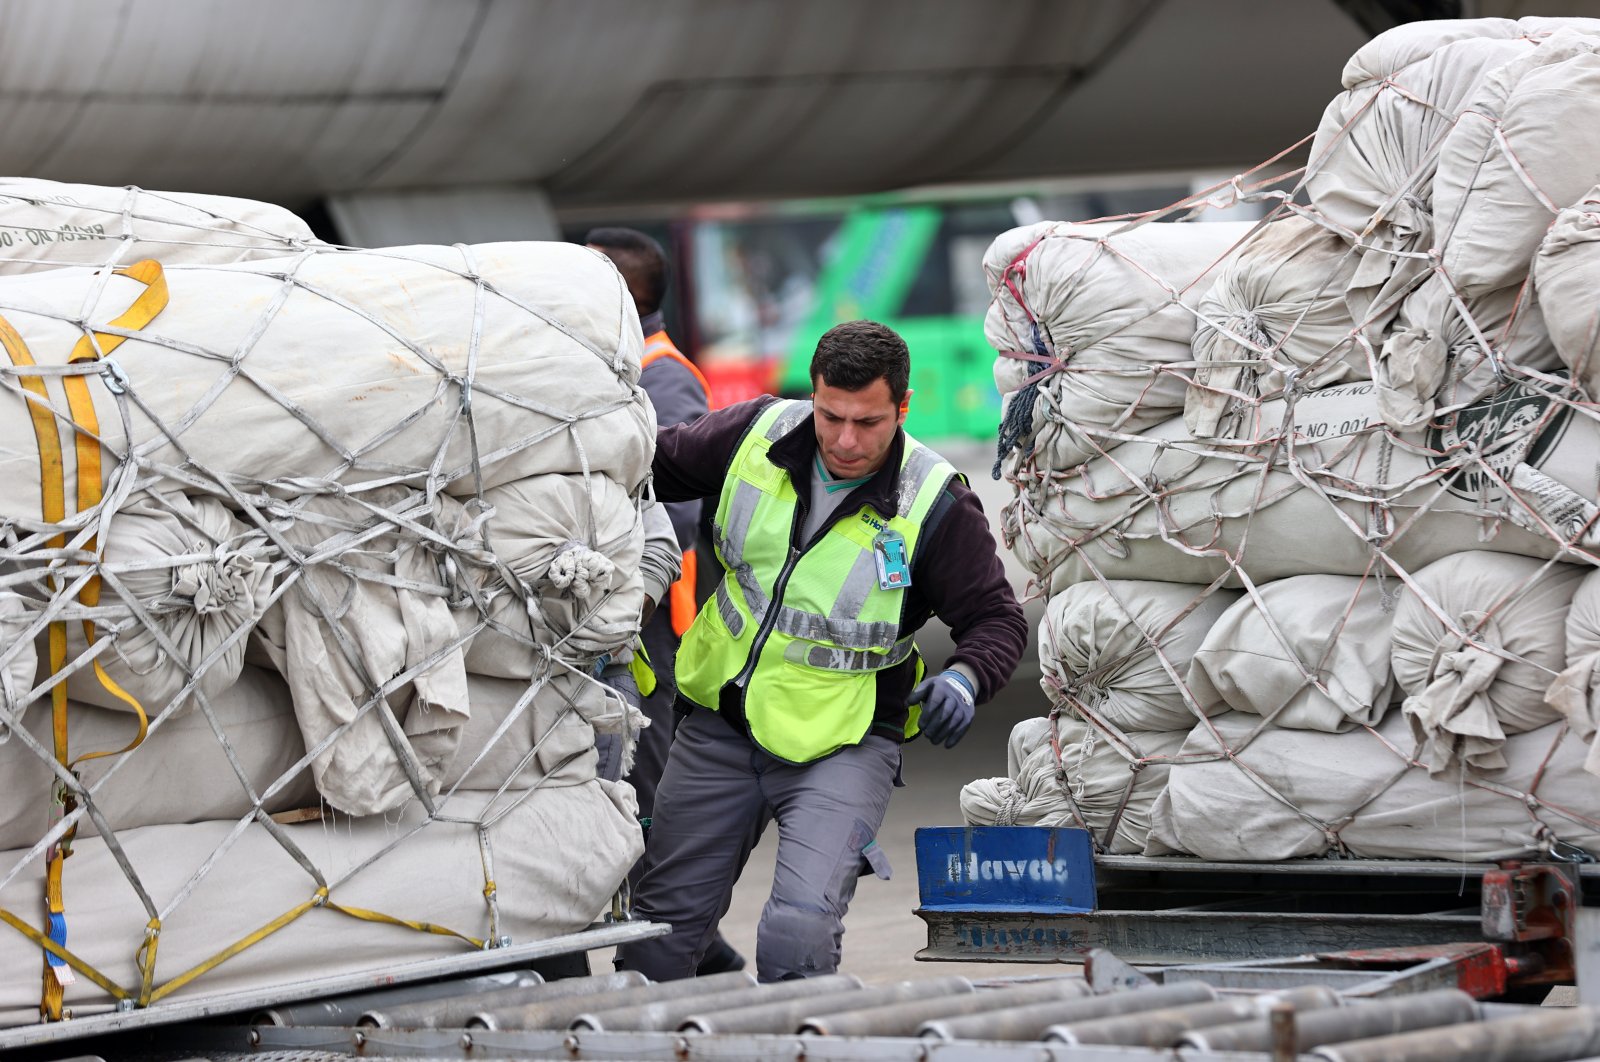 An airport worker pushes a crate of humanitarian aid that arrived from Pakistan for earthquake victims in Adana, Türkiye, March 12, 2023. (AA Photo)